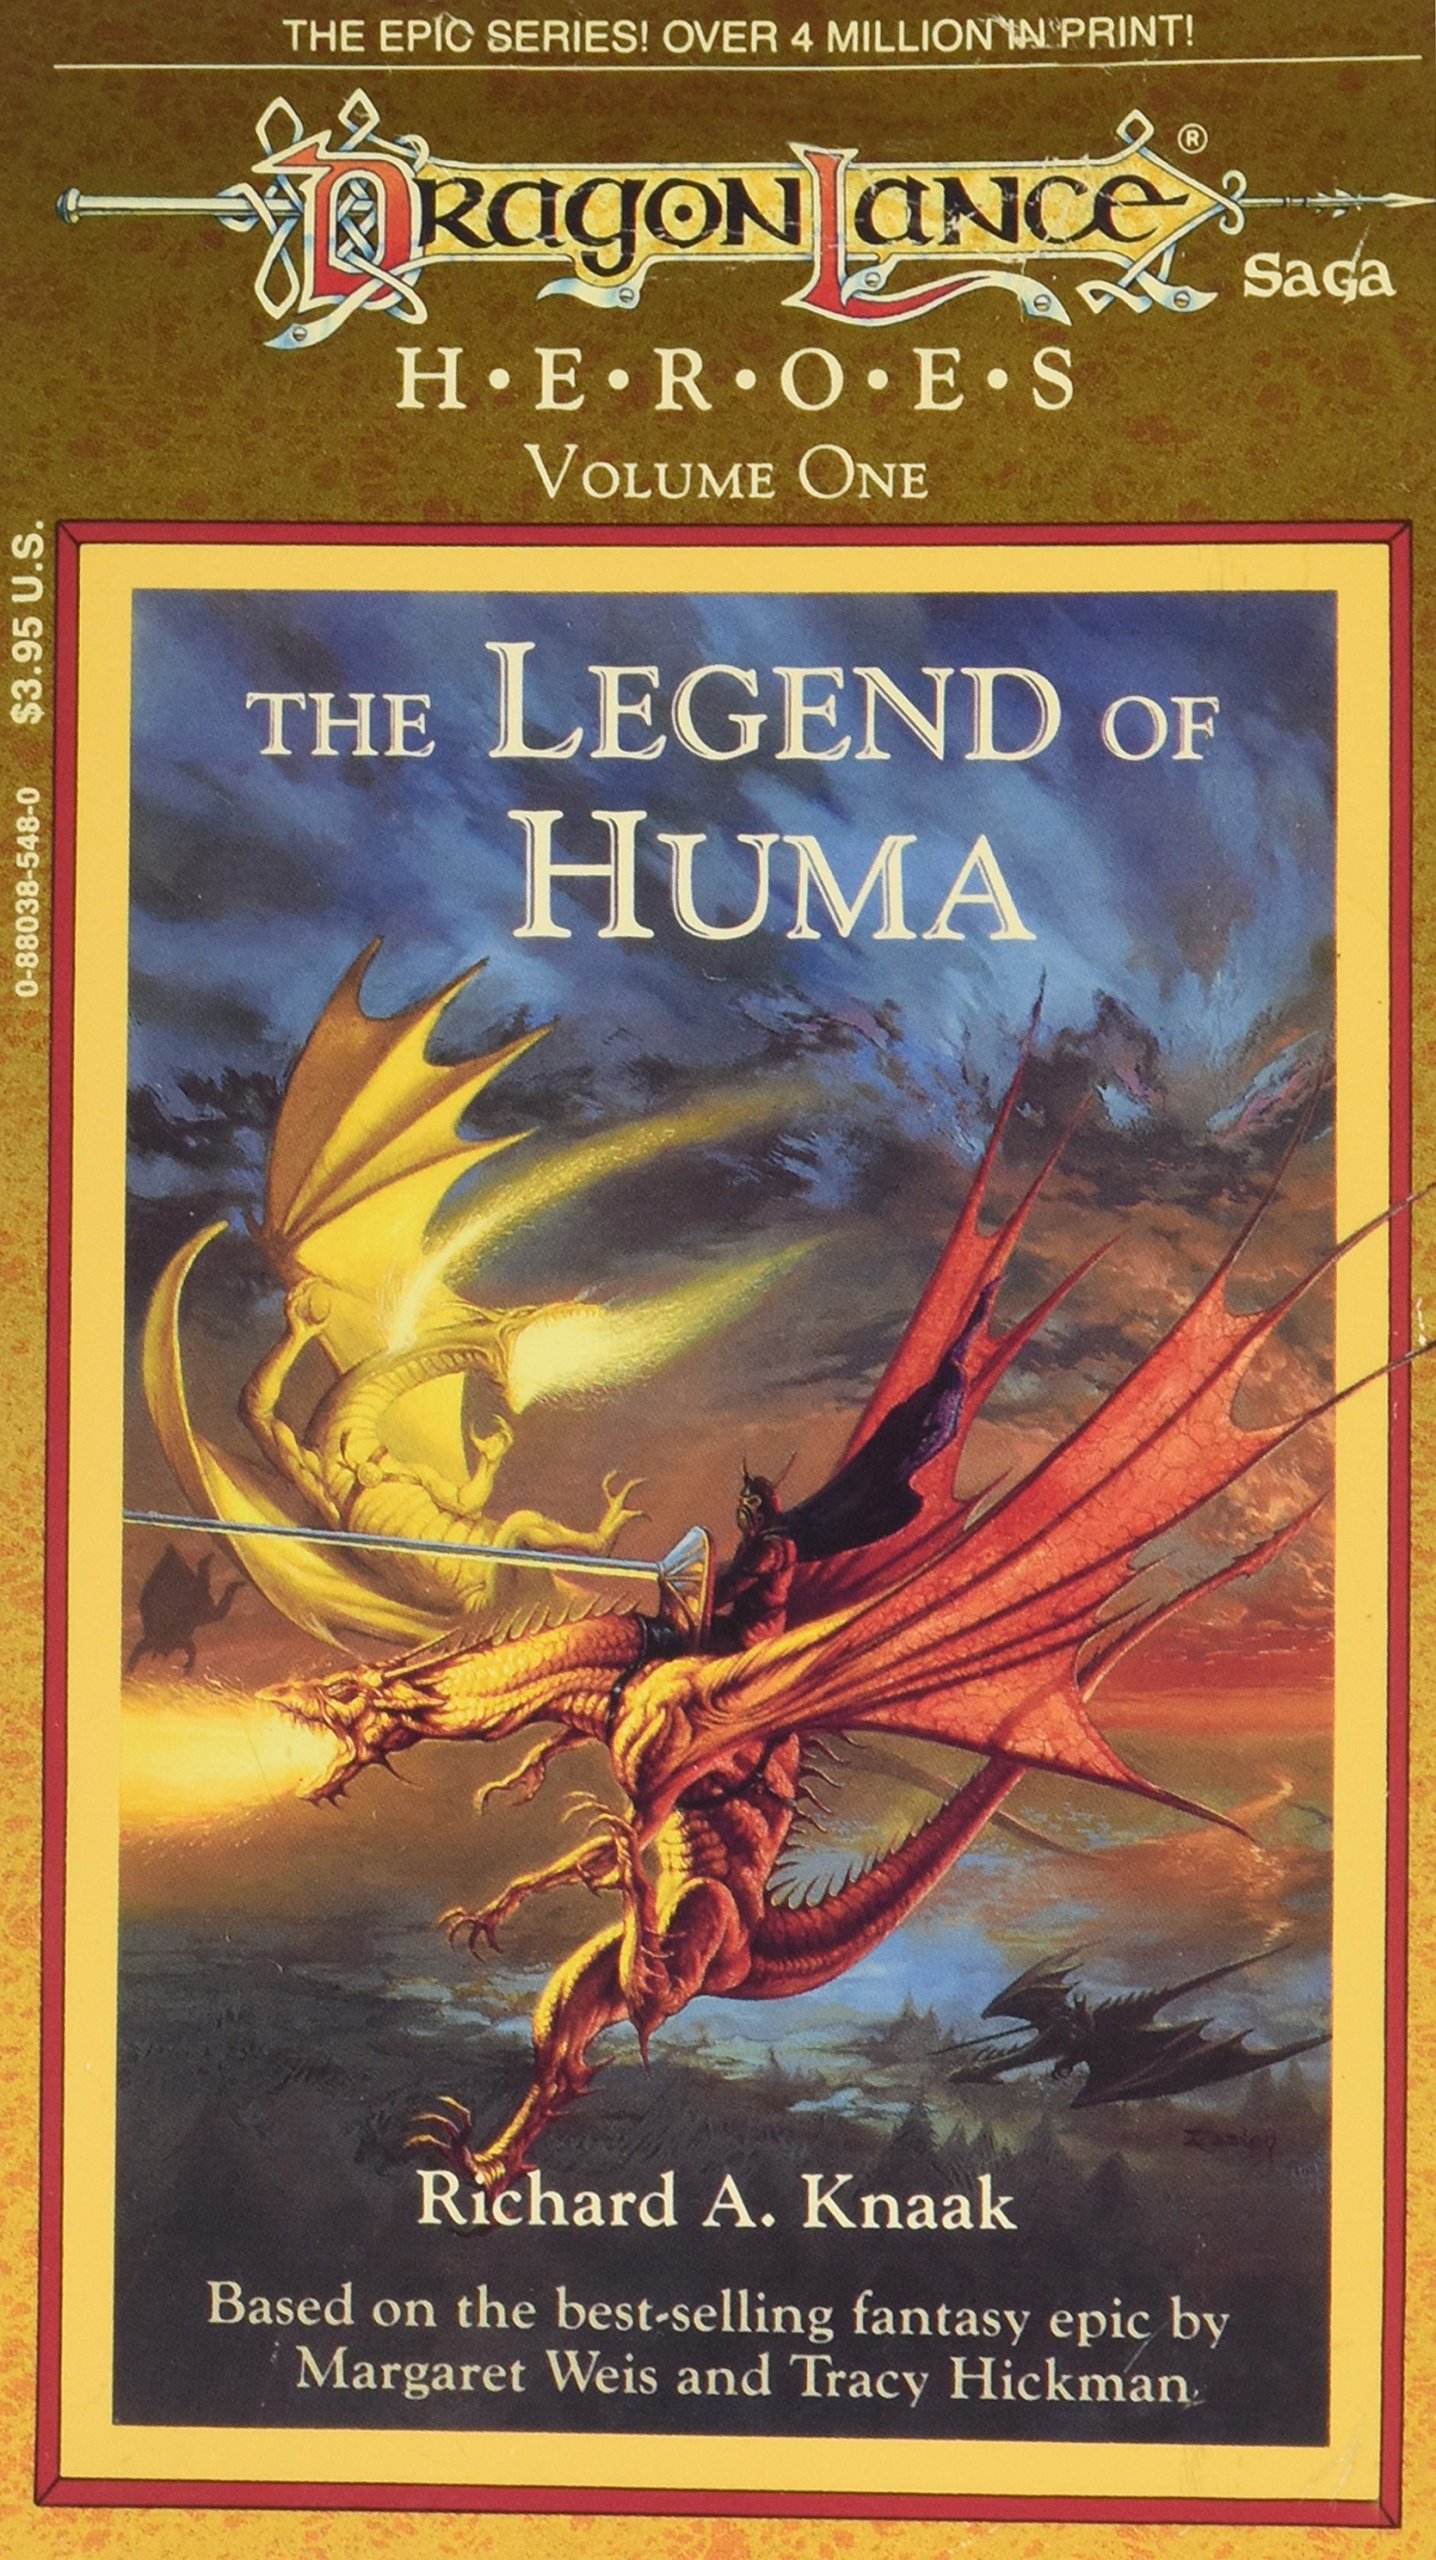 A slightly tilted version of Jeff Easley's original cover art for the novel. It's nice, but Huma rides a silver dragon. (Image: Wizards of the Coast)